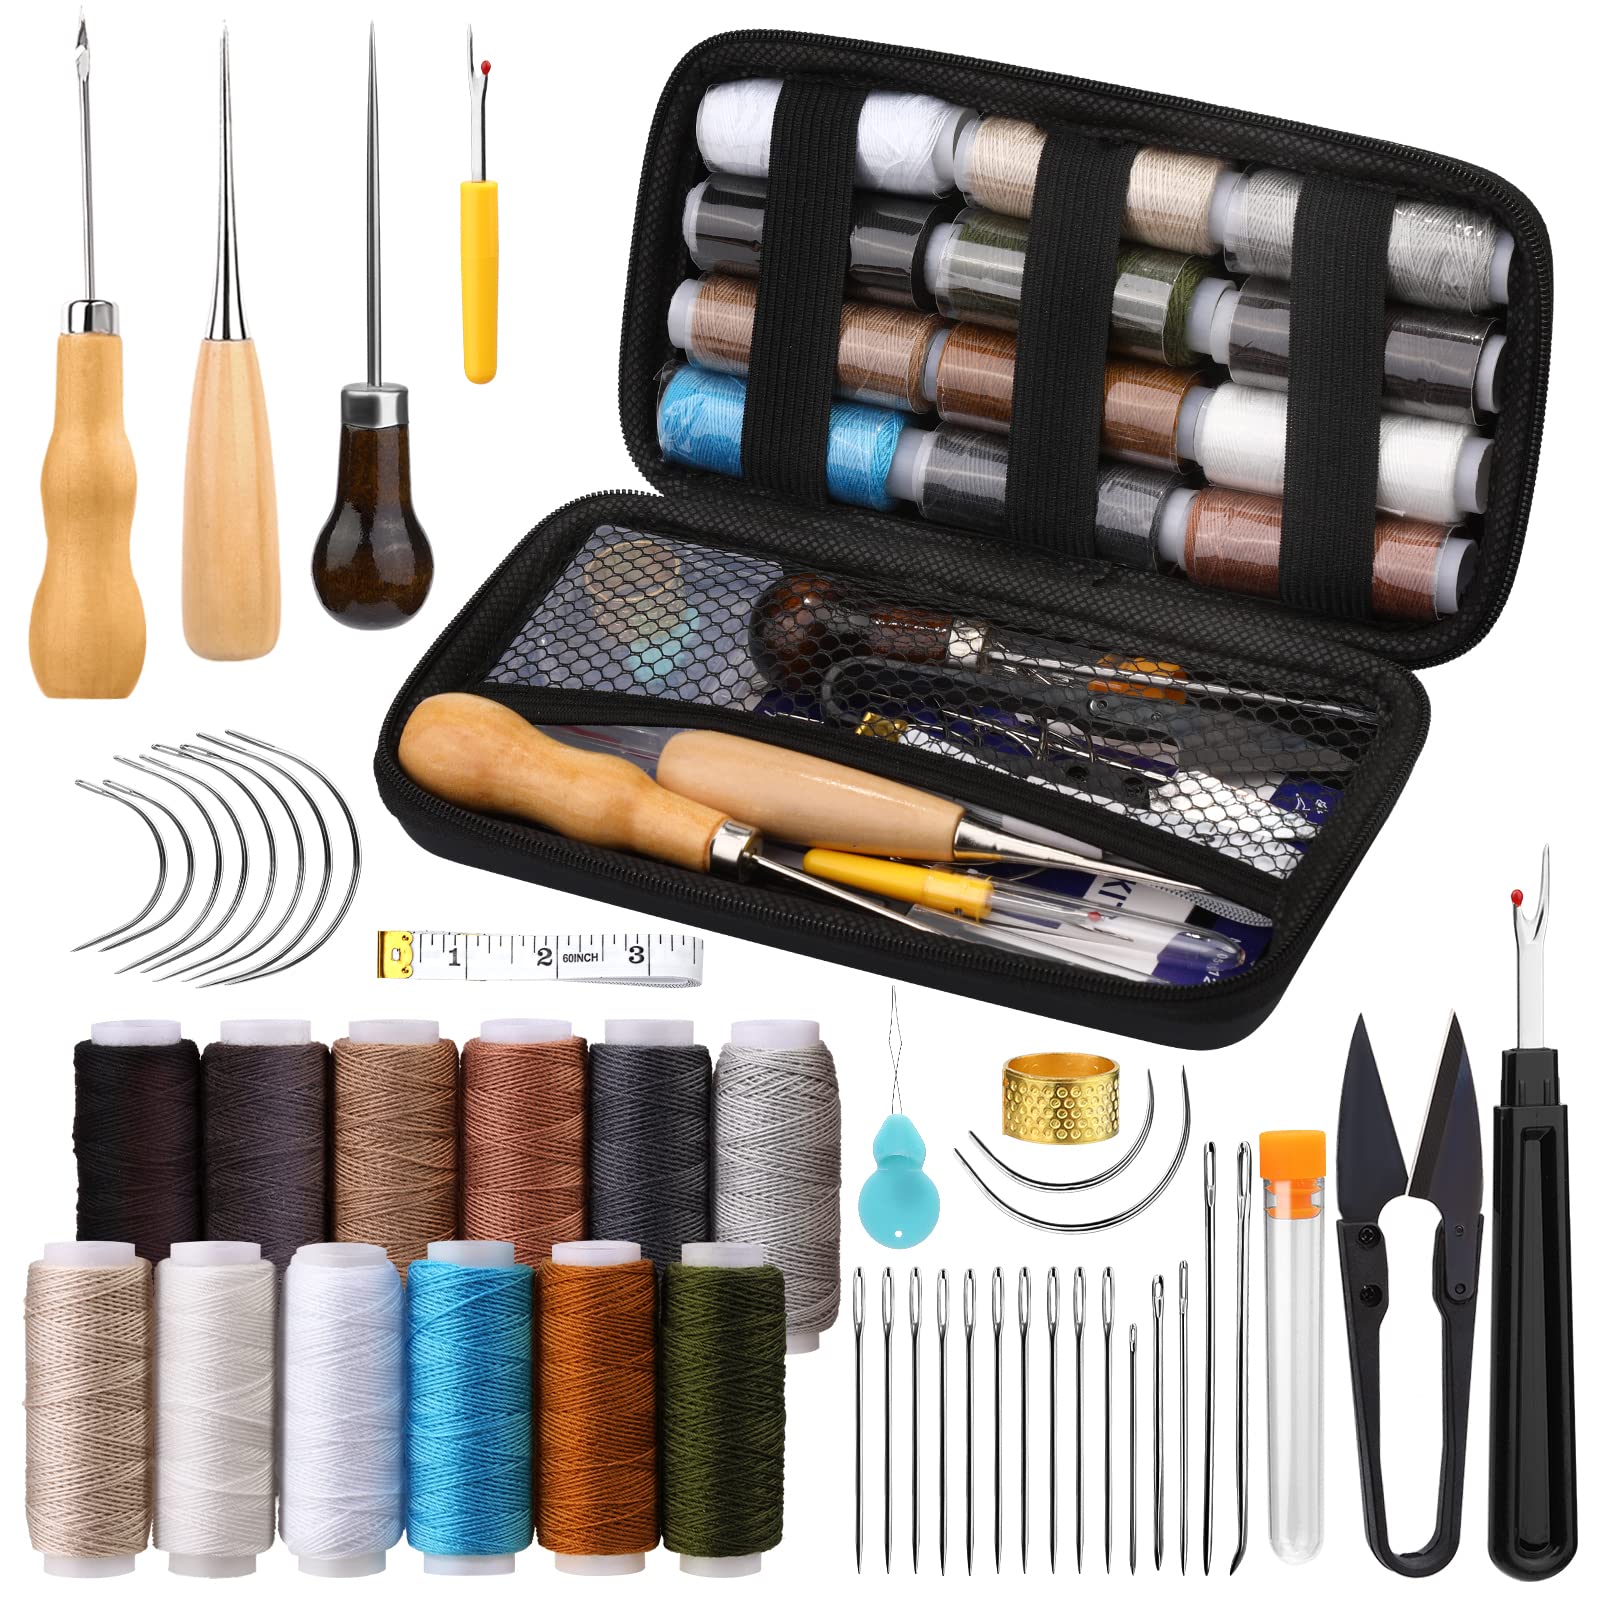 Leather Sewing Kit, Leather Working Tools and Supplies, Leather Working Kit  with Large-Eye Stitching Needles, Waxed Thread, Leather Upholstery Repair  Kit, Leather Sewing Tools for DIY Leather Craft